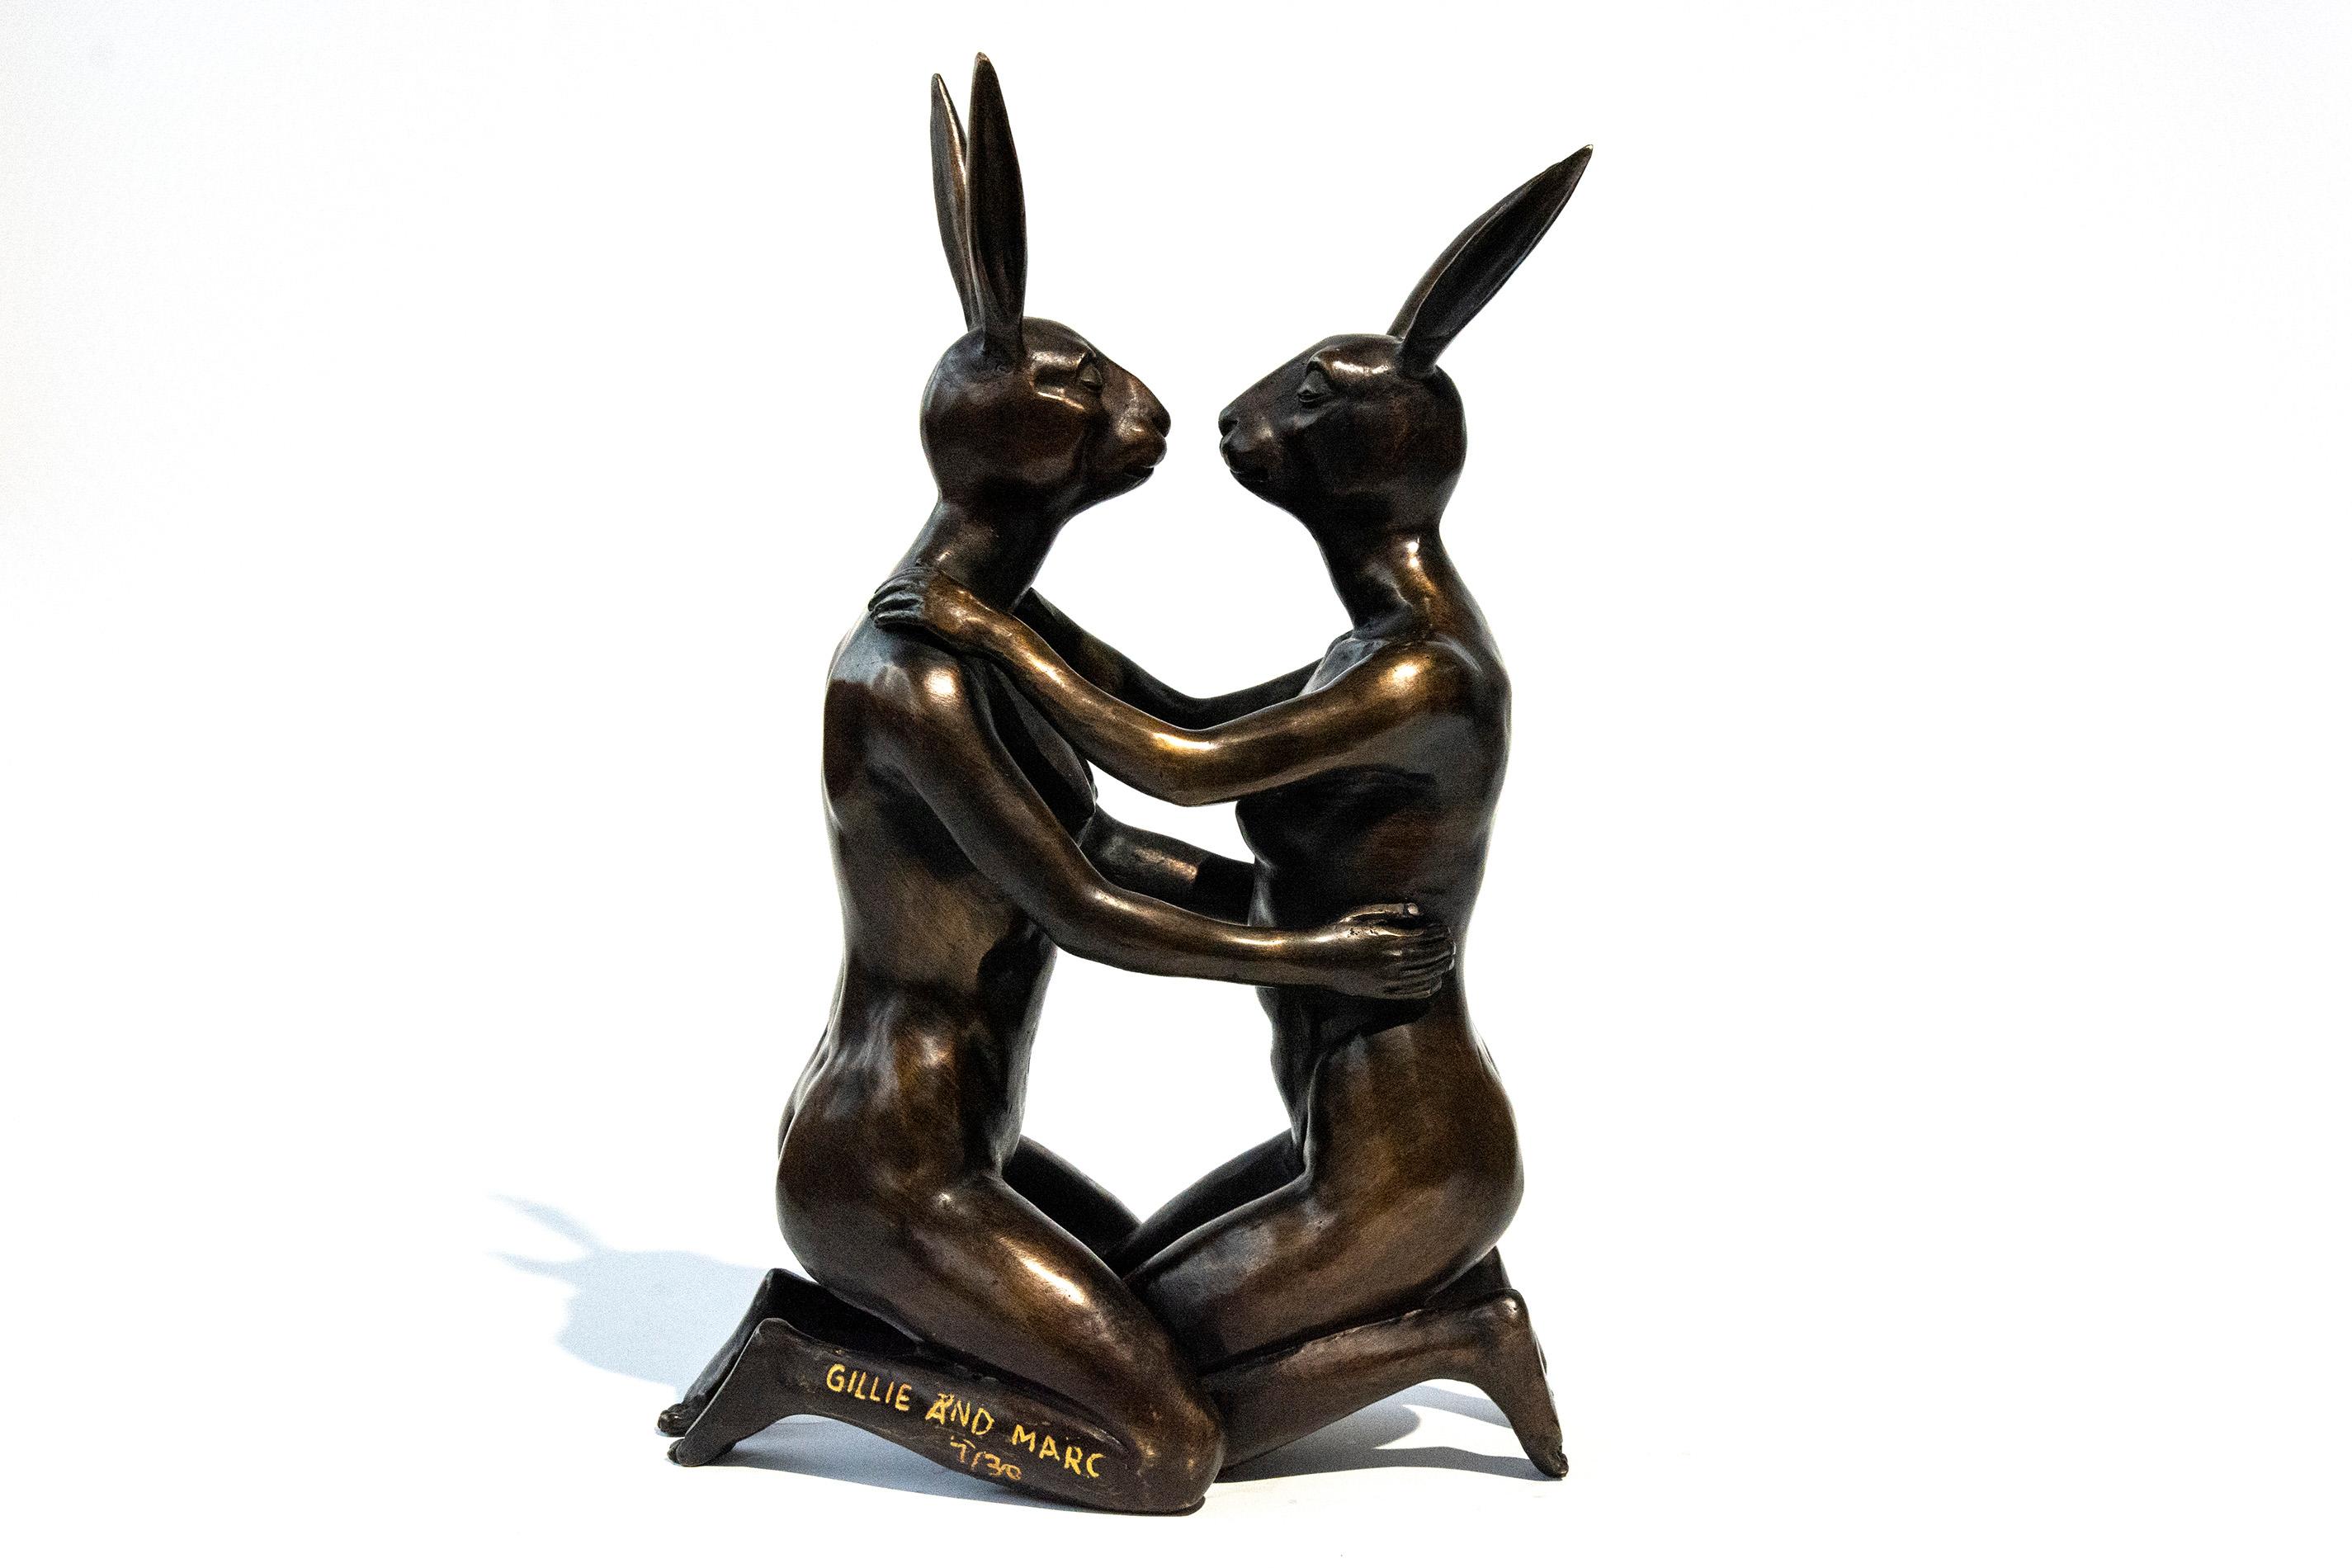 Gillie and Marc Schattner Figurative Sculpture - She loved being in love 7/30 - playful, figurative bronze sculpture